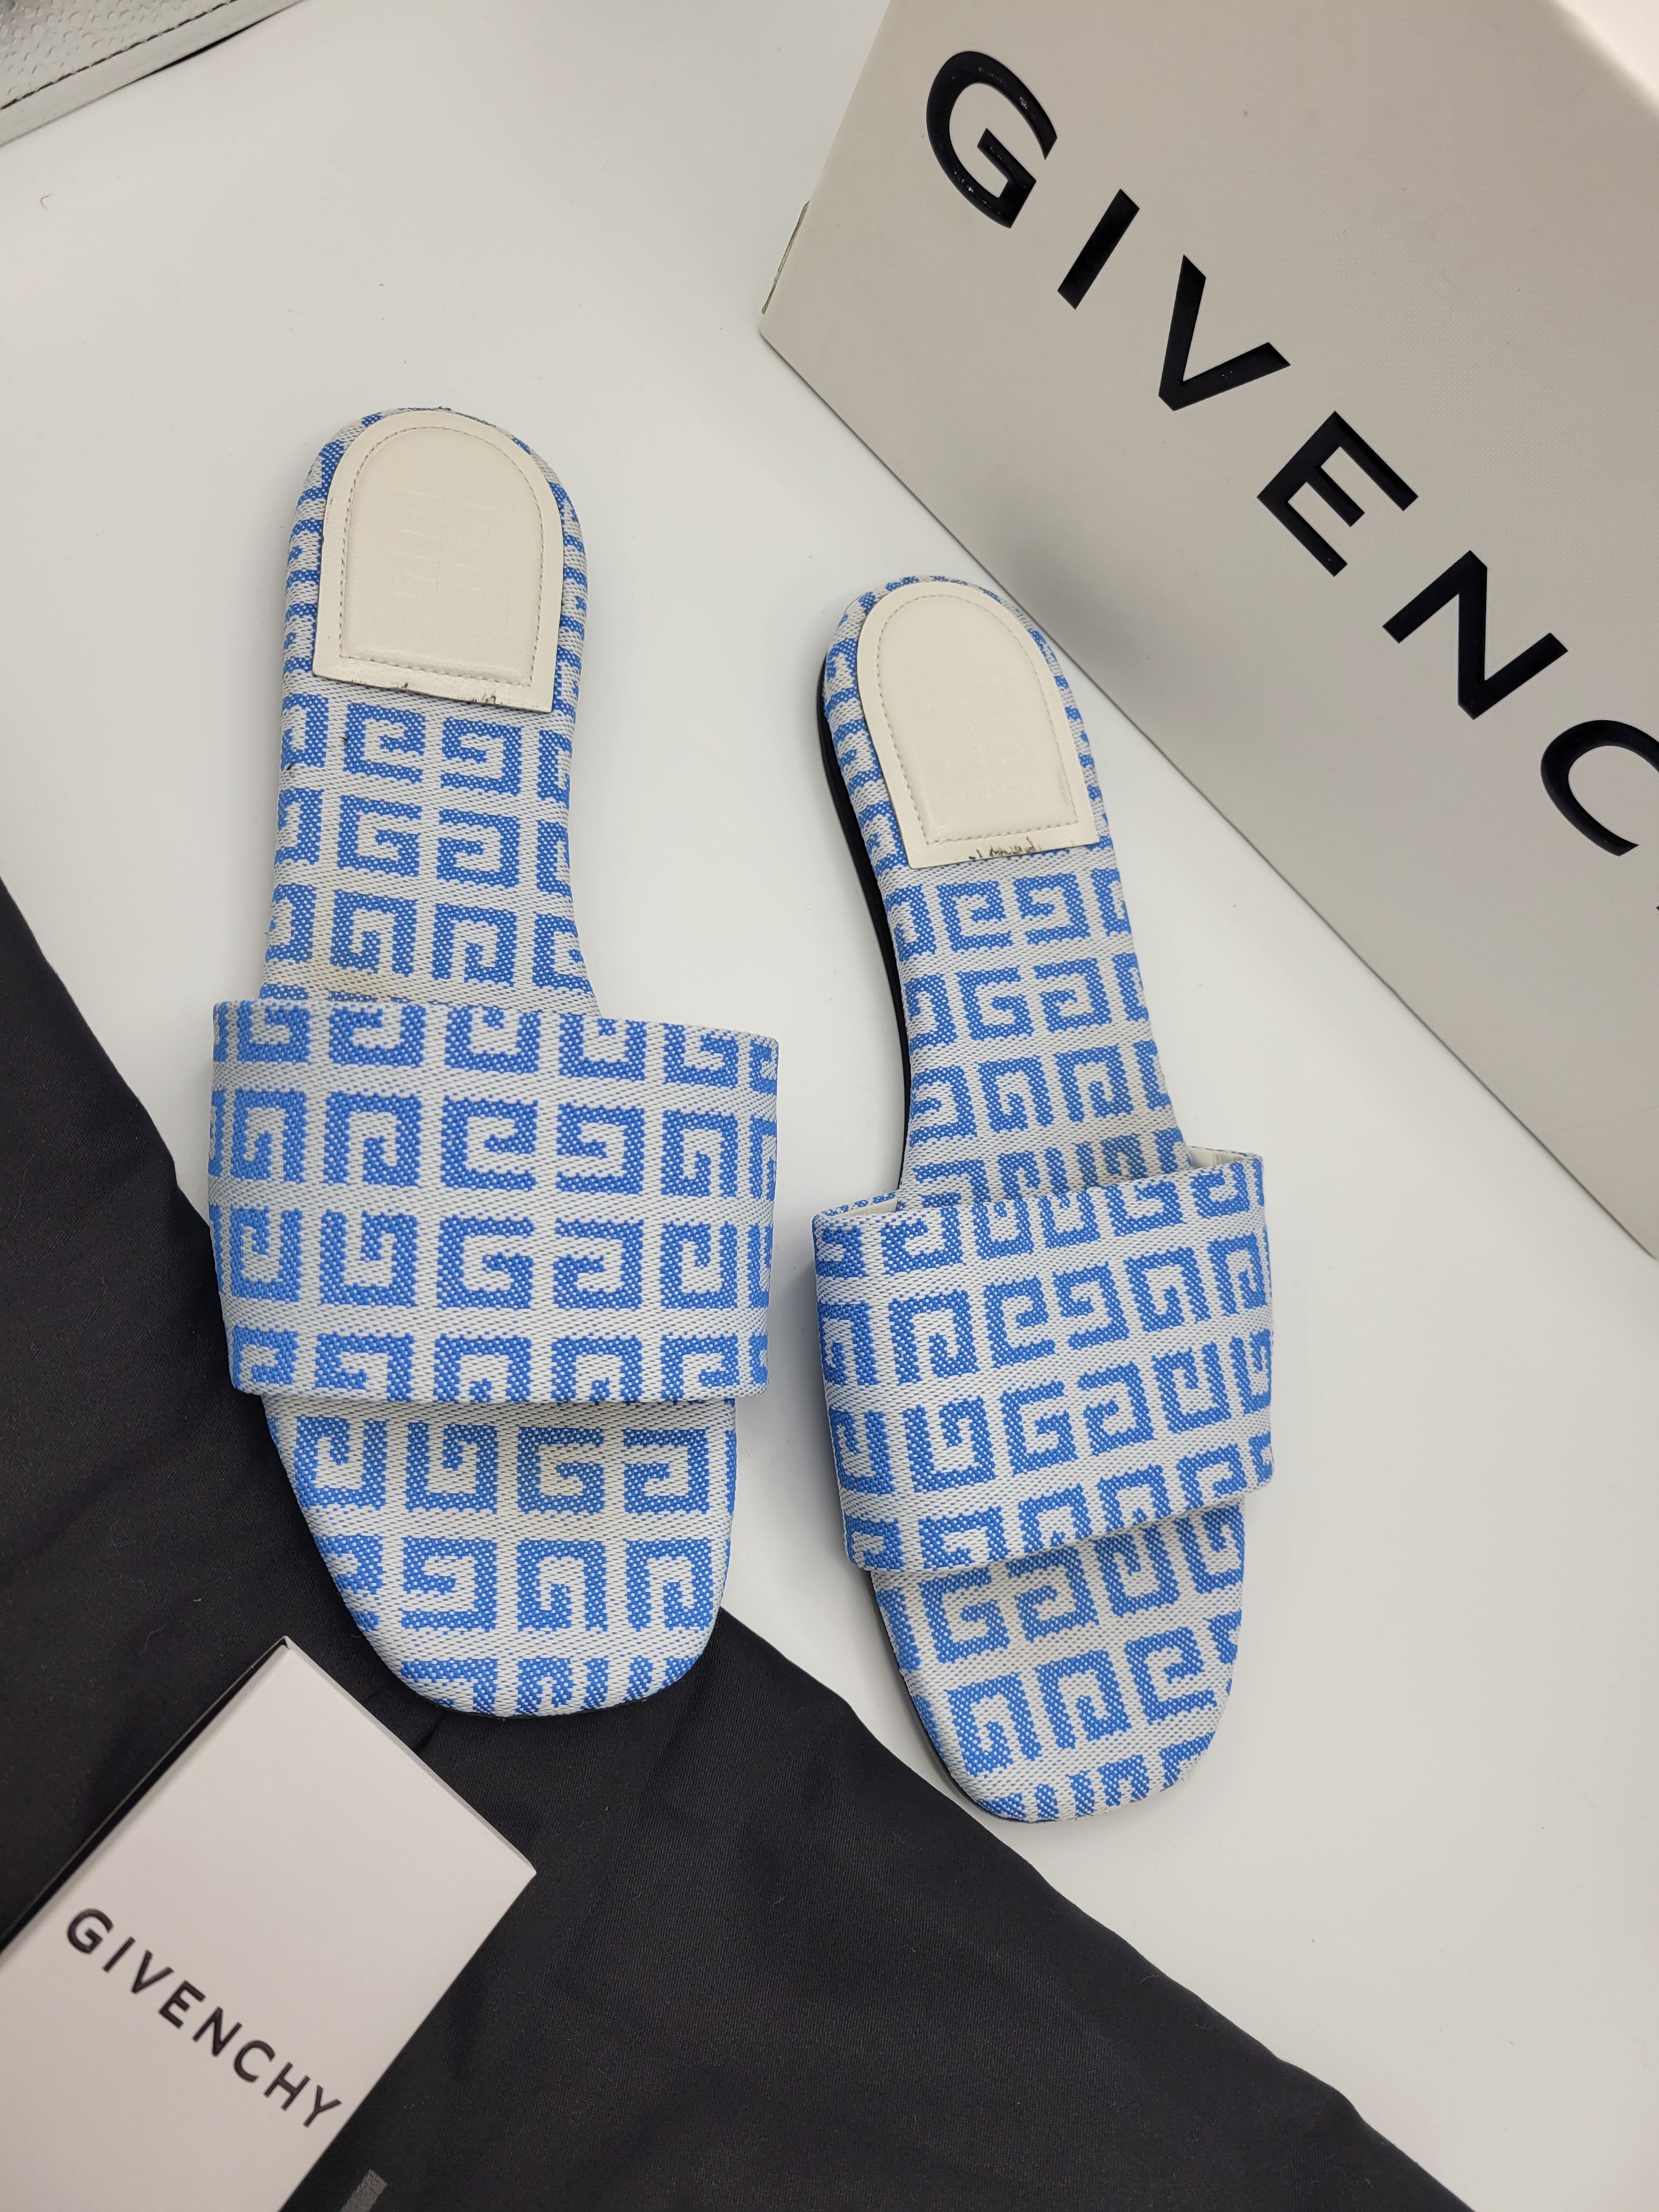 Givenchy 4G Flat Mule Sandals in White & Blue WOMEN'S SIZE 41